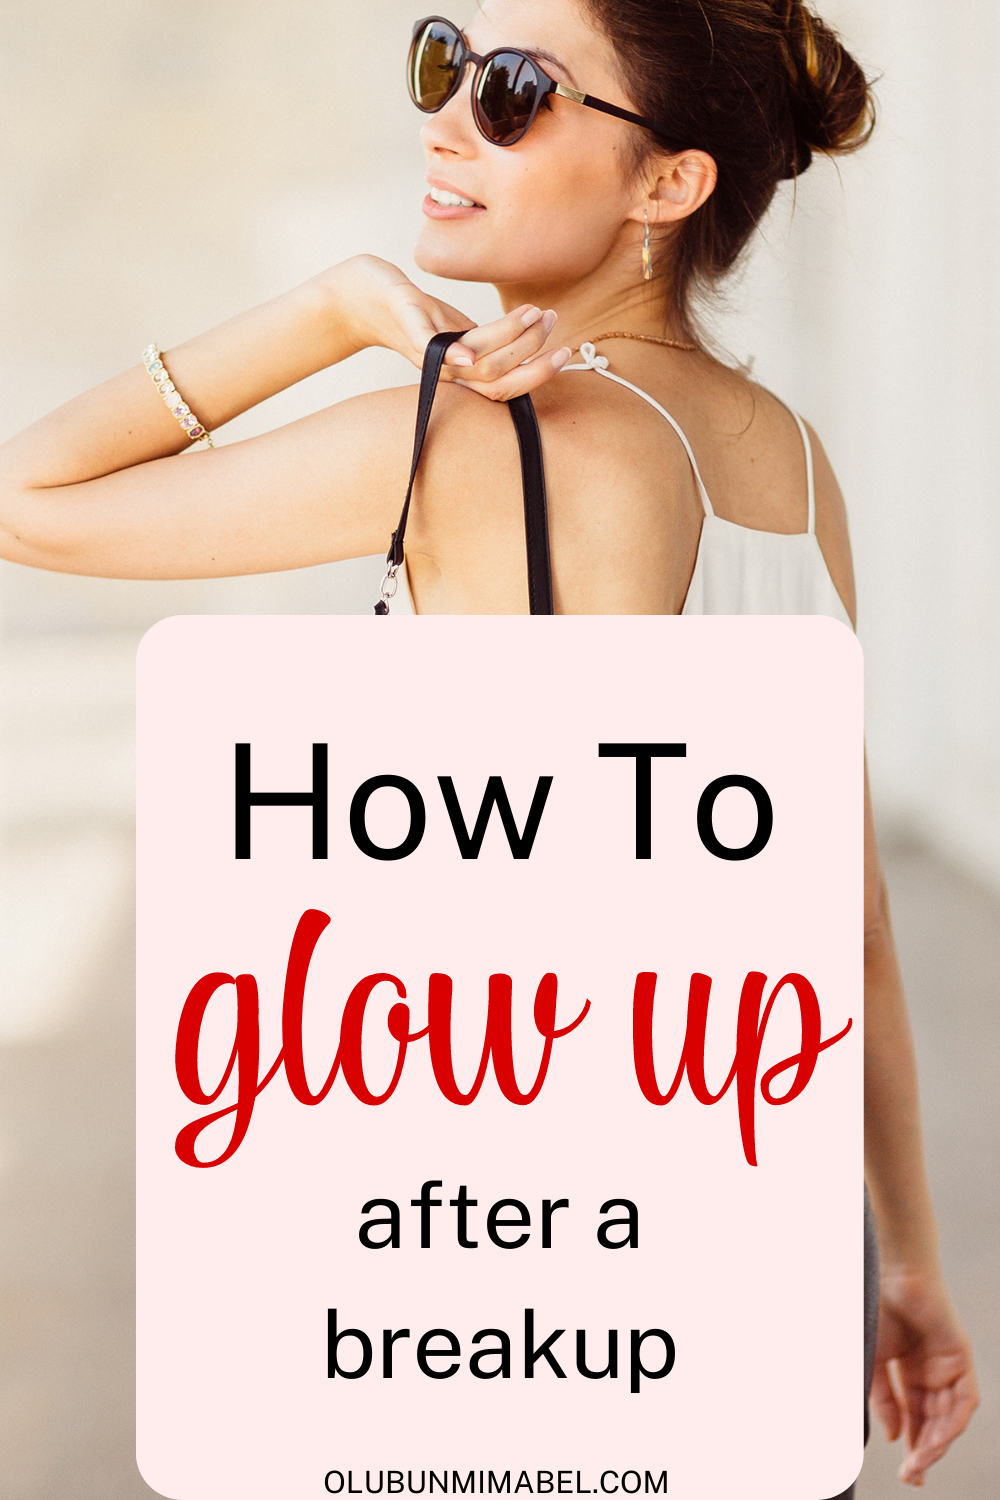 How To Glow Up After a Breakup